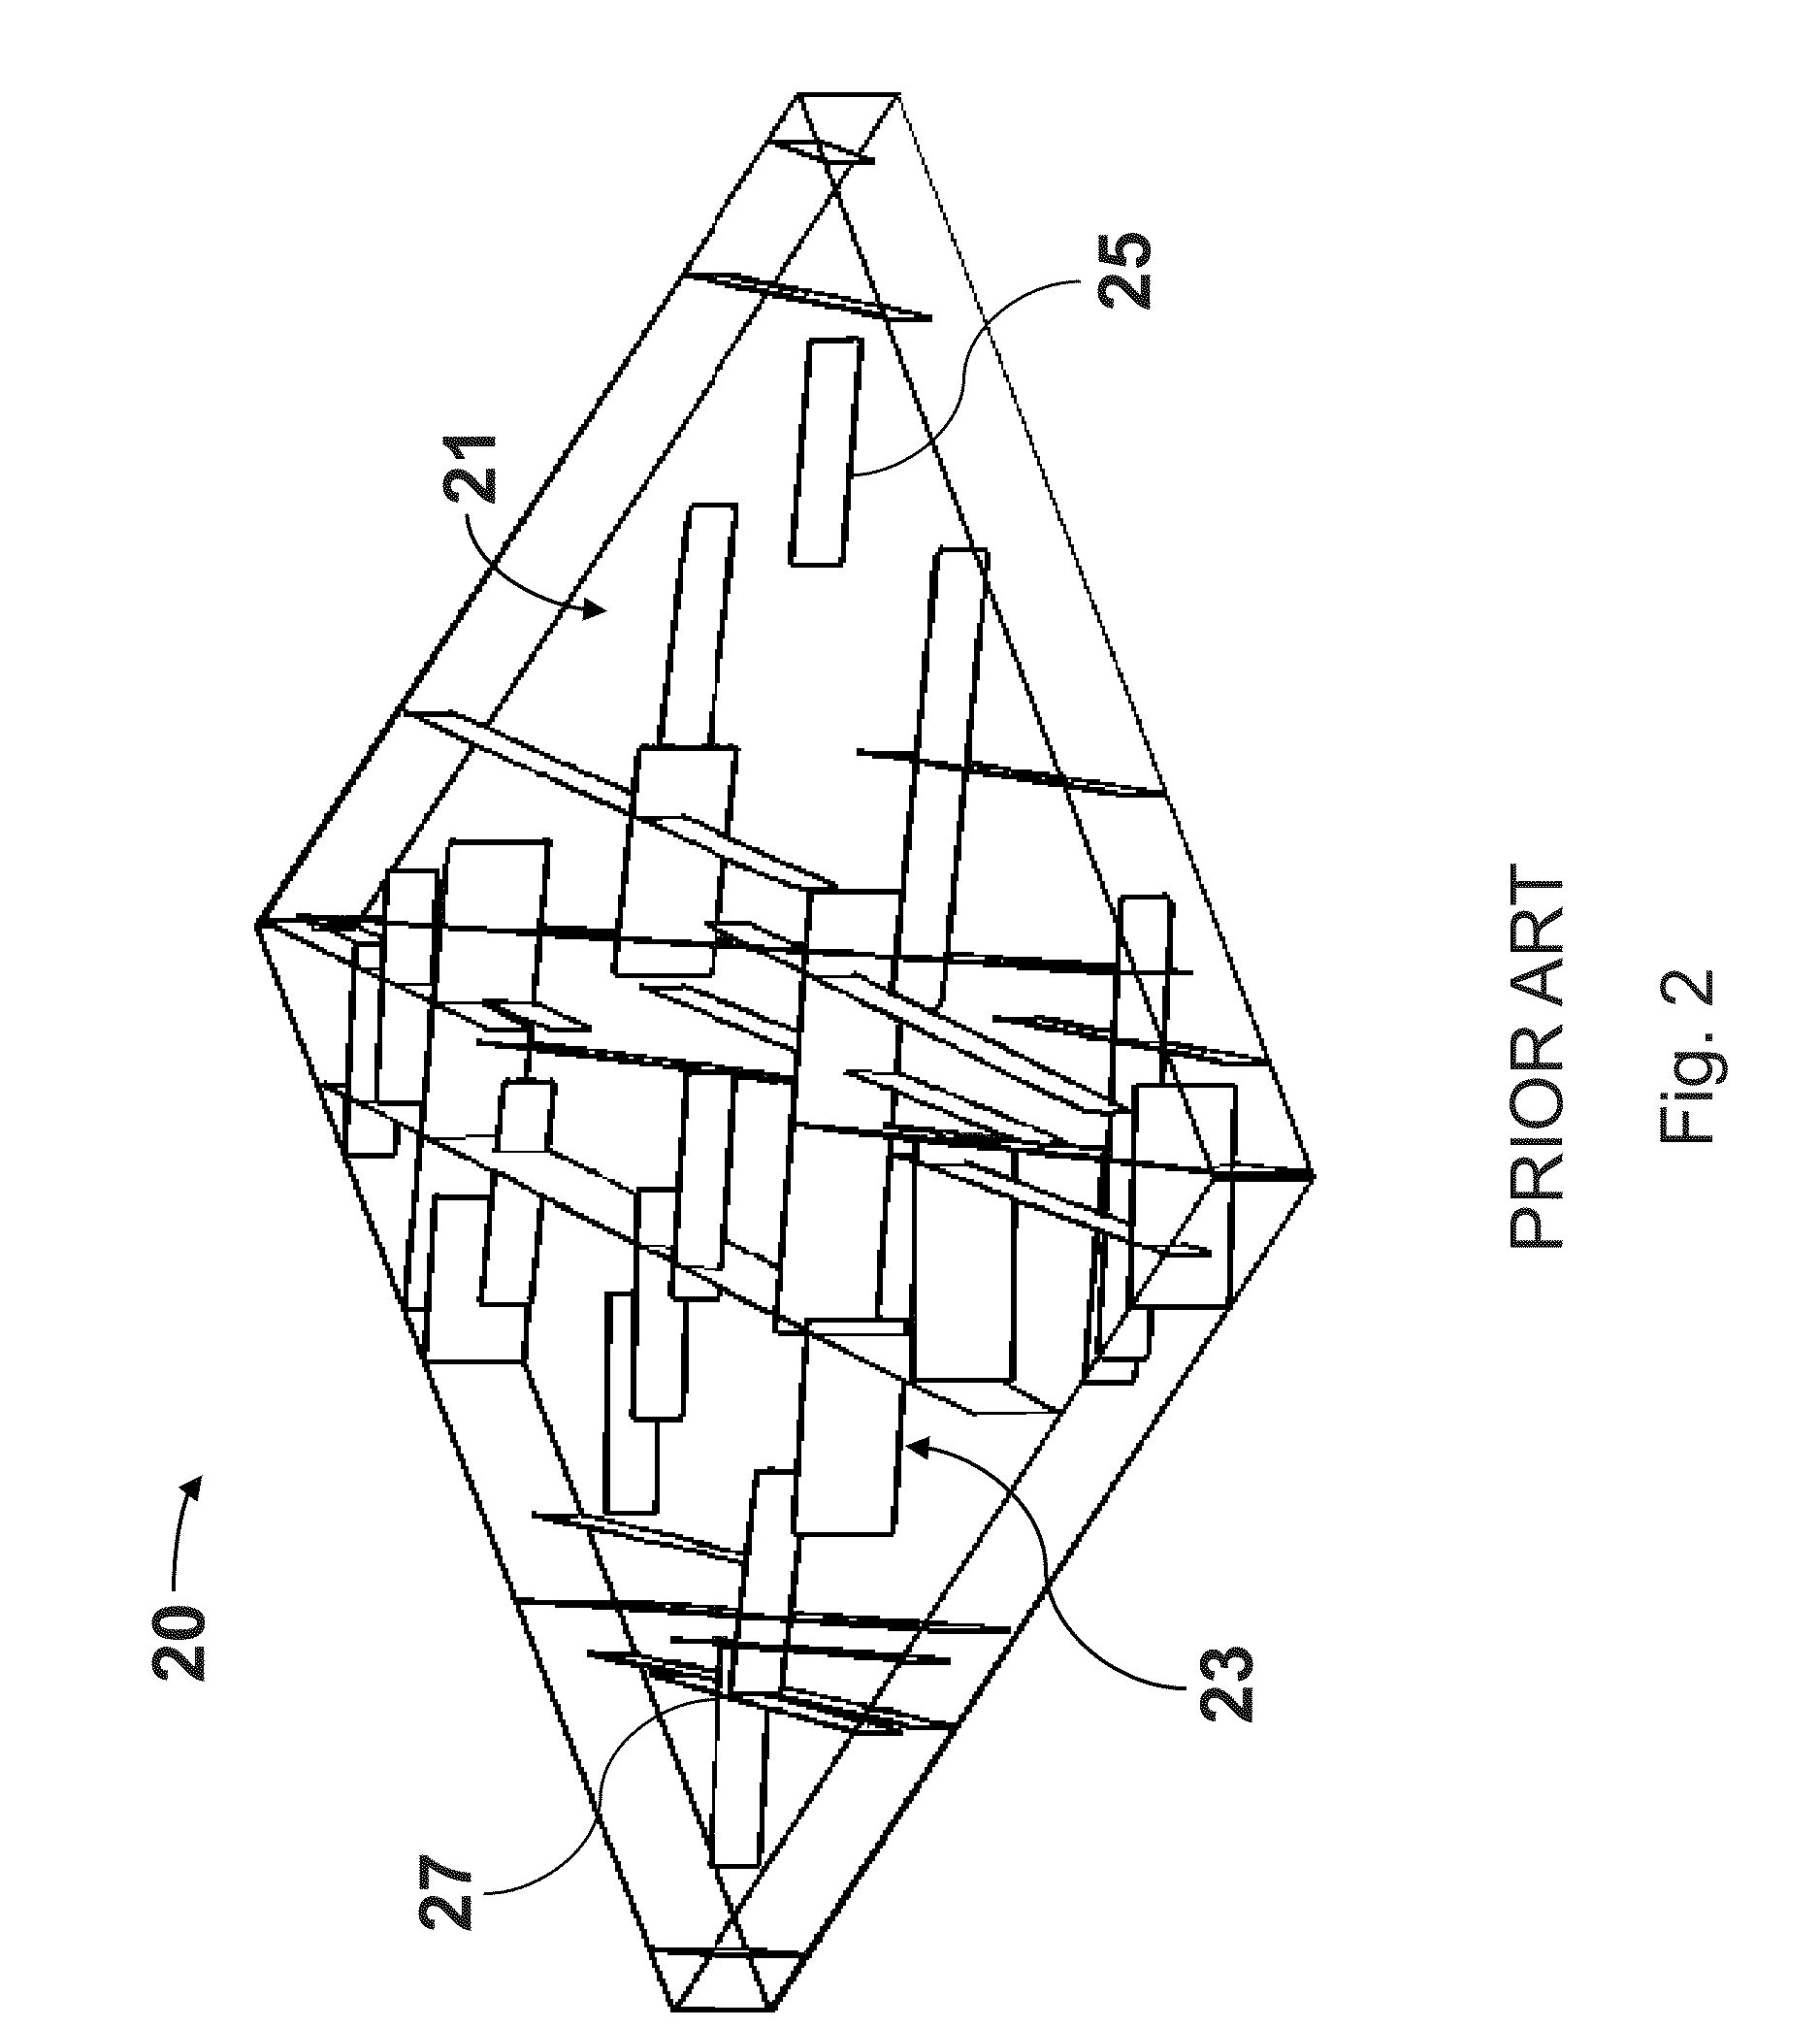 System and method for characterizing fractures in a subsurface reservoir